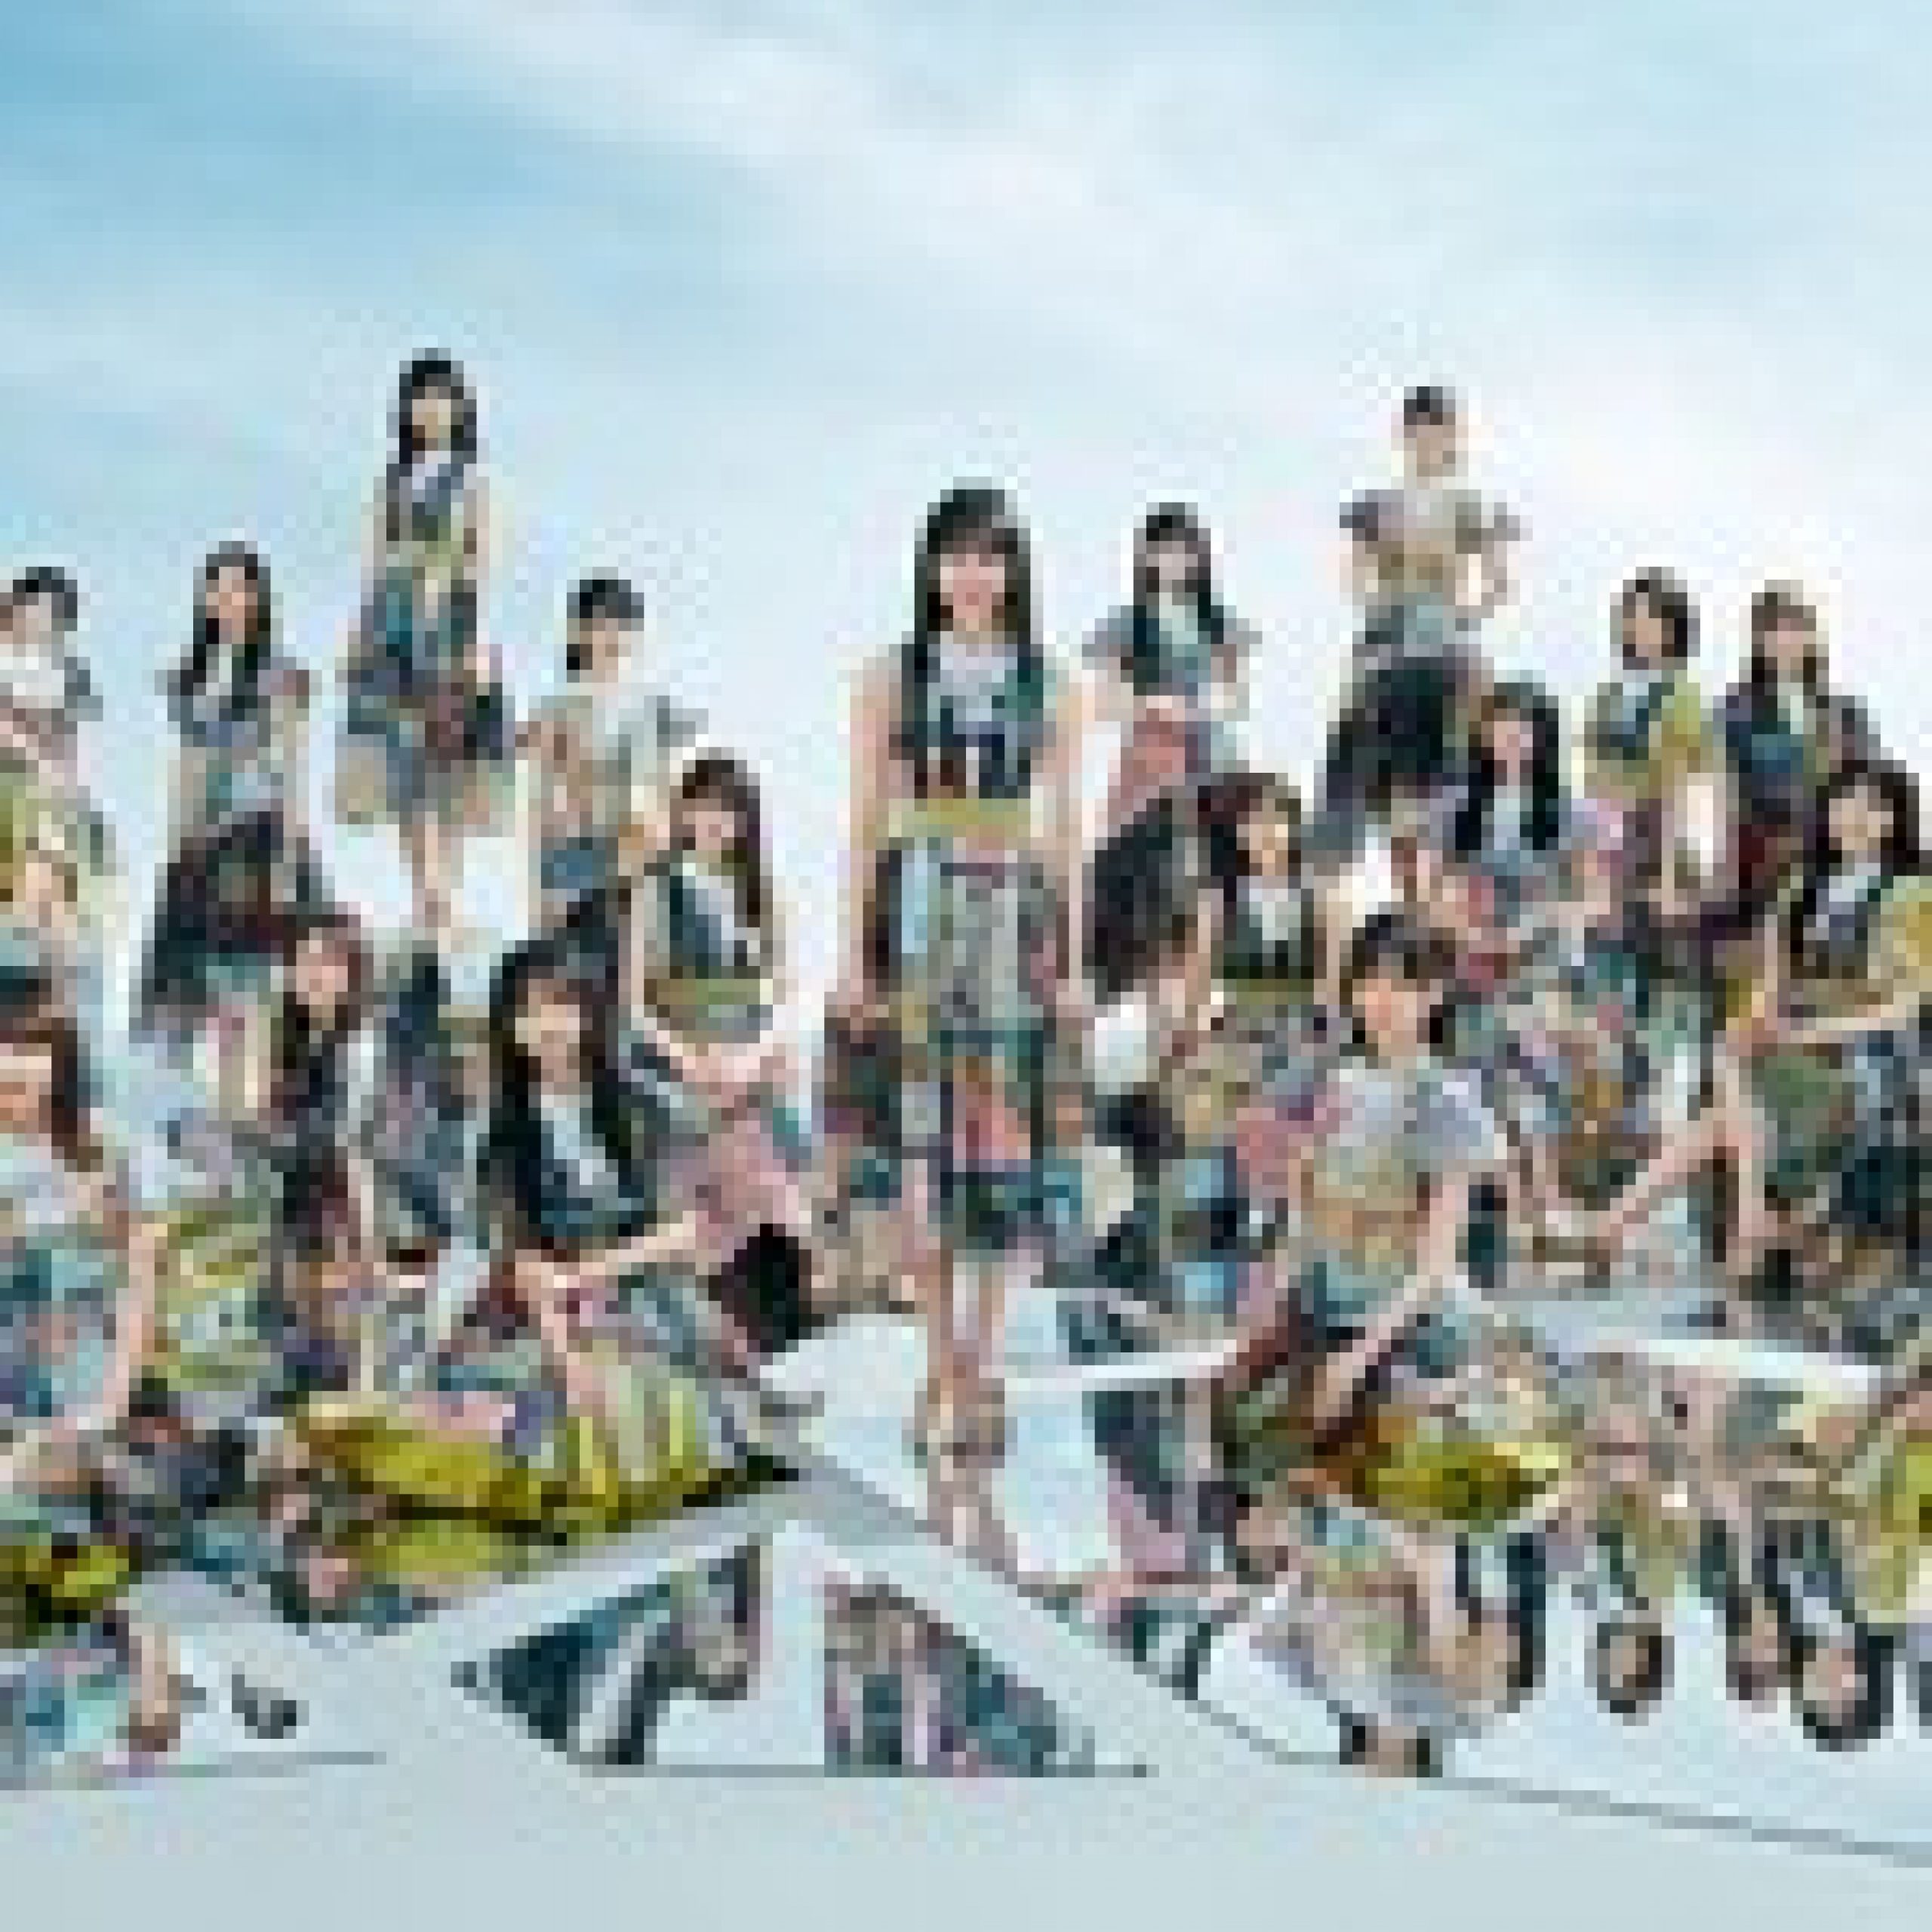 Nogizaka46 Shoots to No. 1 on Japan Hot 100 With Over 700K CDs Sold